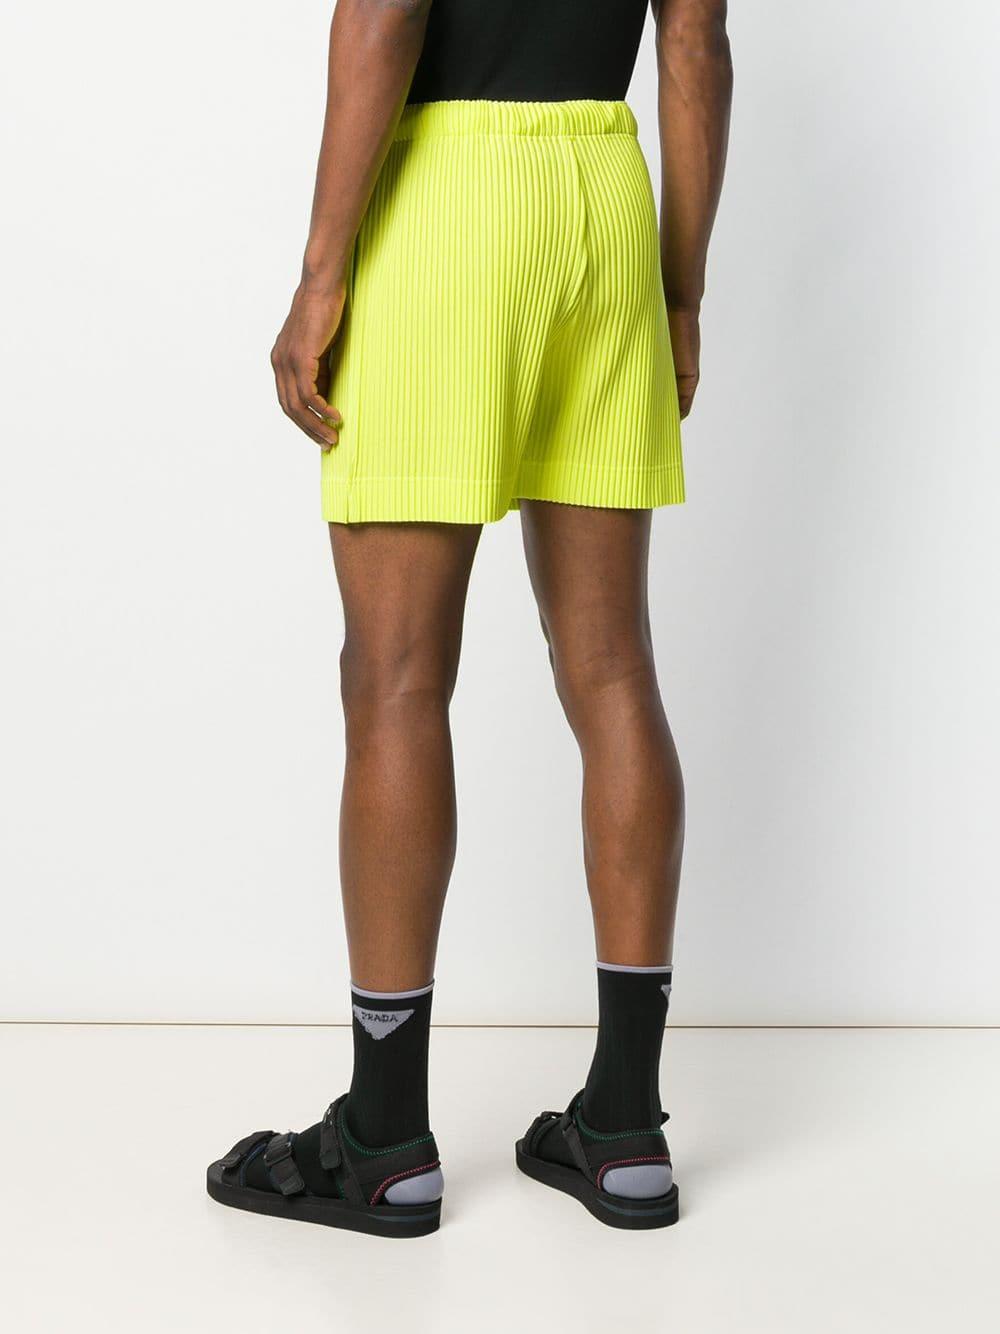 Homme Plissé Issey Miyake Pleated Track Shorts in Green for Men - Lyst